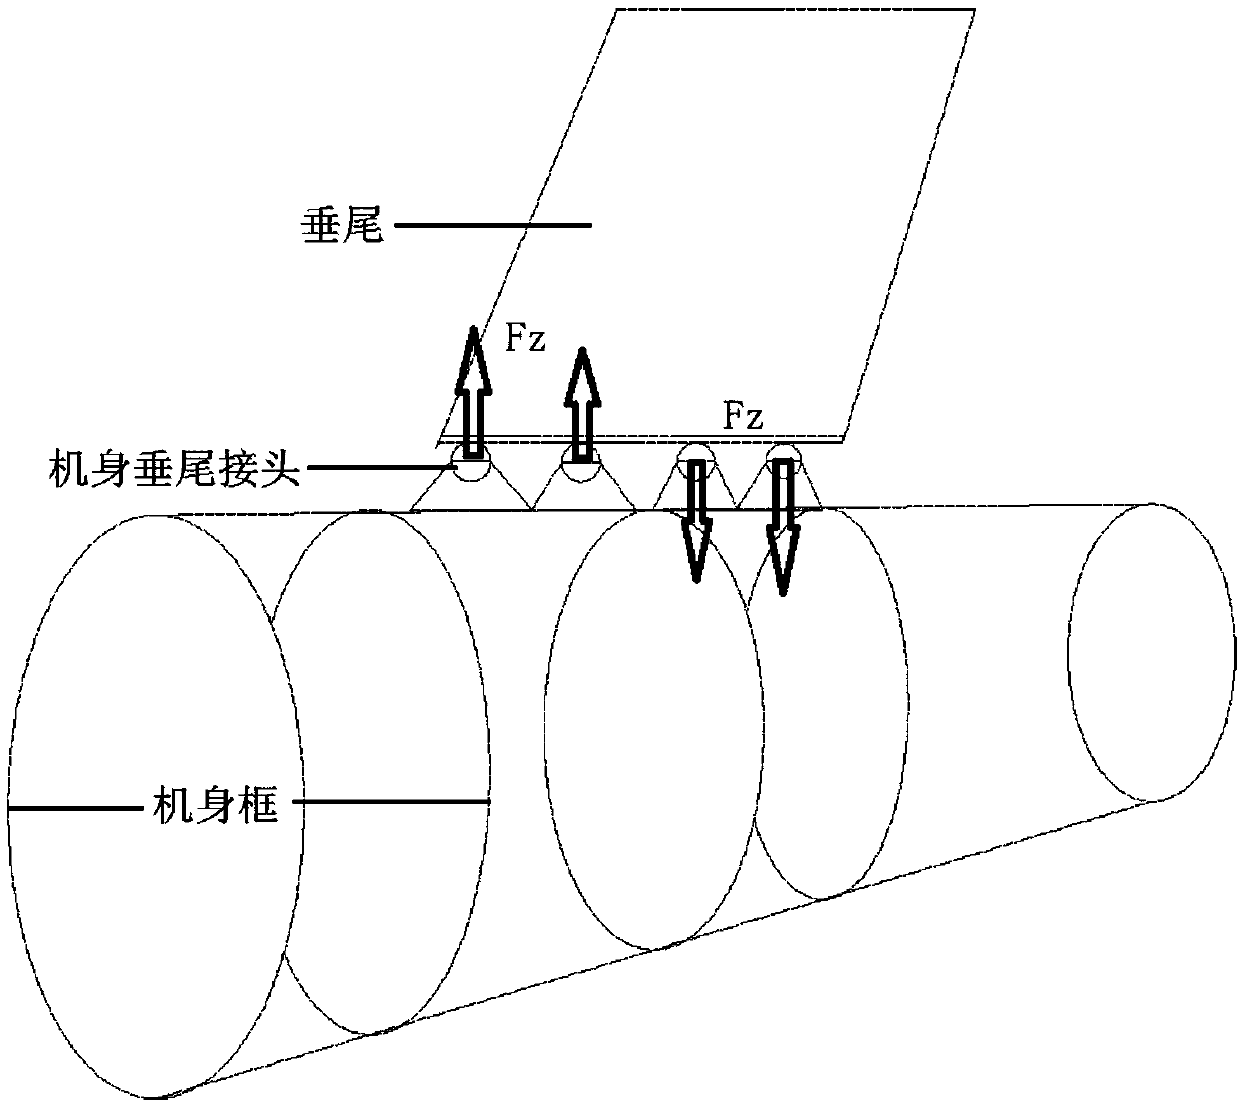 Loading design method for high vertical fin vertical load of full-scale fatigue test